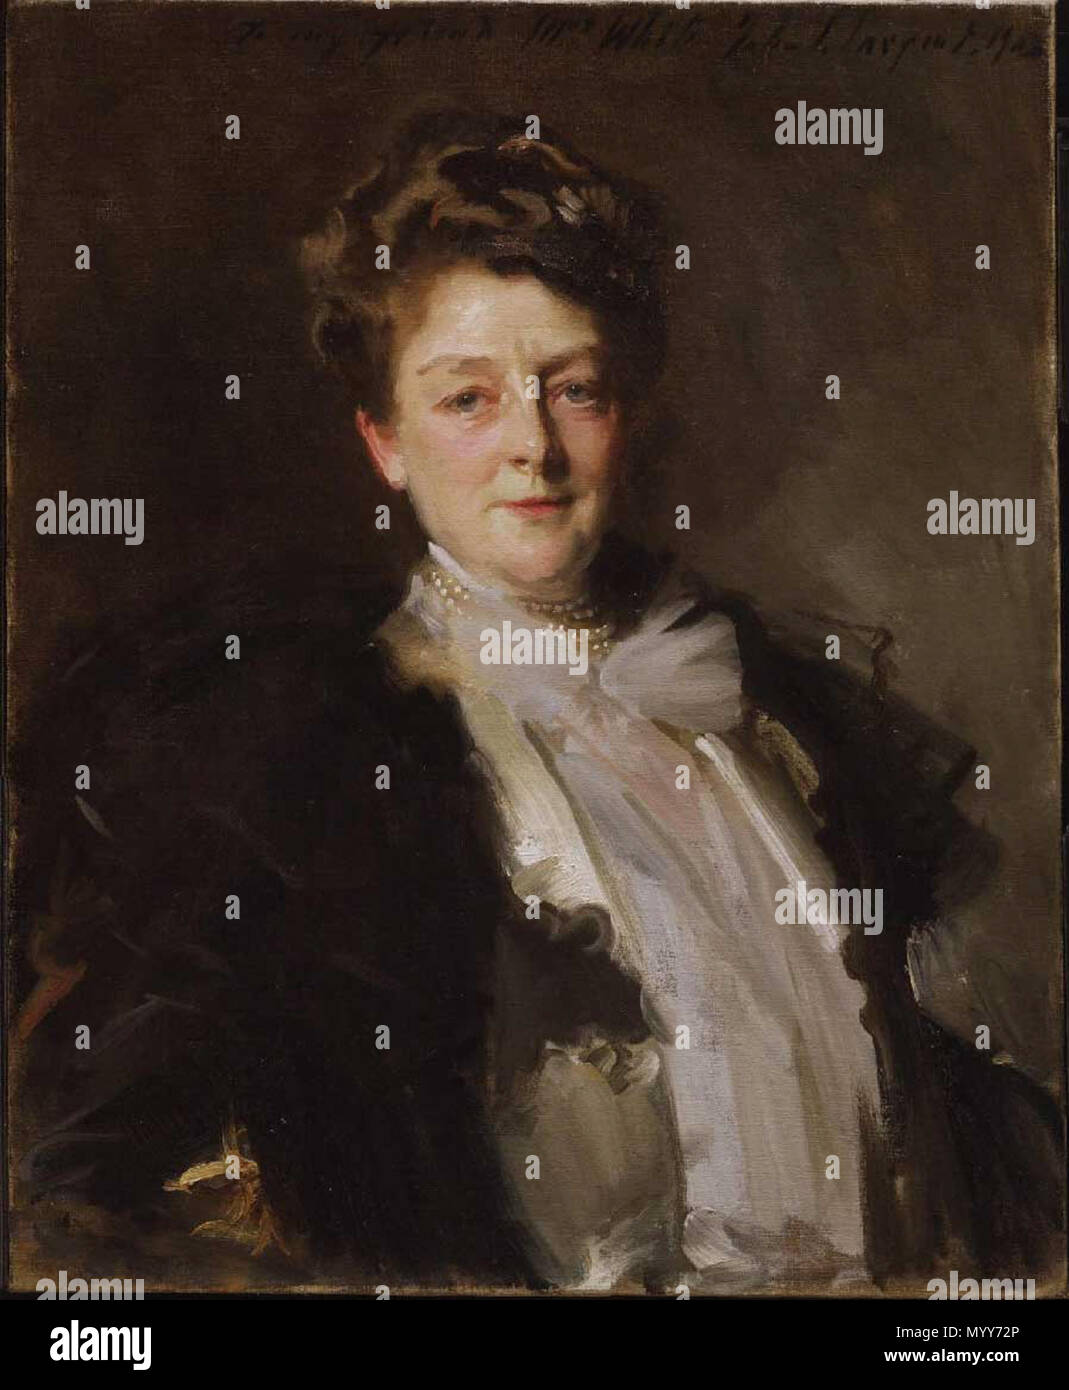 . English: Mrs. J. William White John Singer Sargent -- American painter 1903 Philadelphia Museum of Art Oil on canvas 76.4 x 63.7 cm (30 1/16 x 25 1/16 in) Gallery 119, American Art, first floor F1925-5-1, Mrs. J. William White Collection, 1925 Jpg: Friend of the JSS Gallery  . 1903. John Singer Sargent Born: January 12, 1856, Florence Died: April 14, 1925, London, United Kingdom 72 Mrs. J. William White Stock Photo